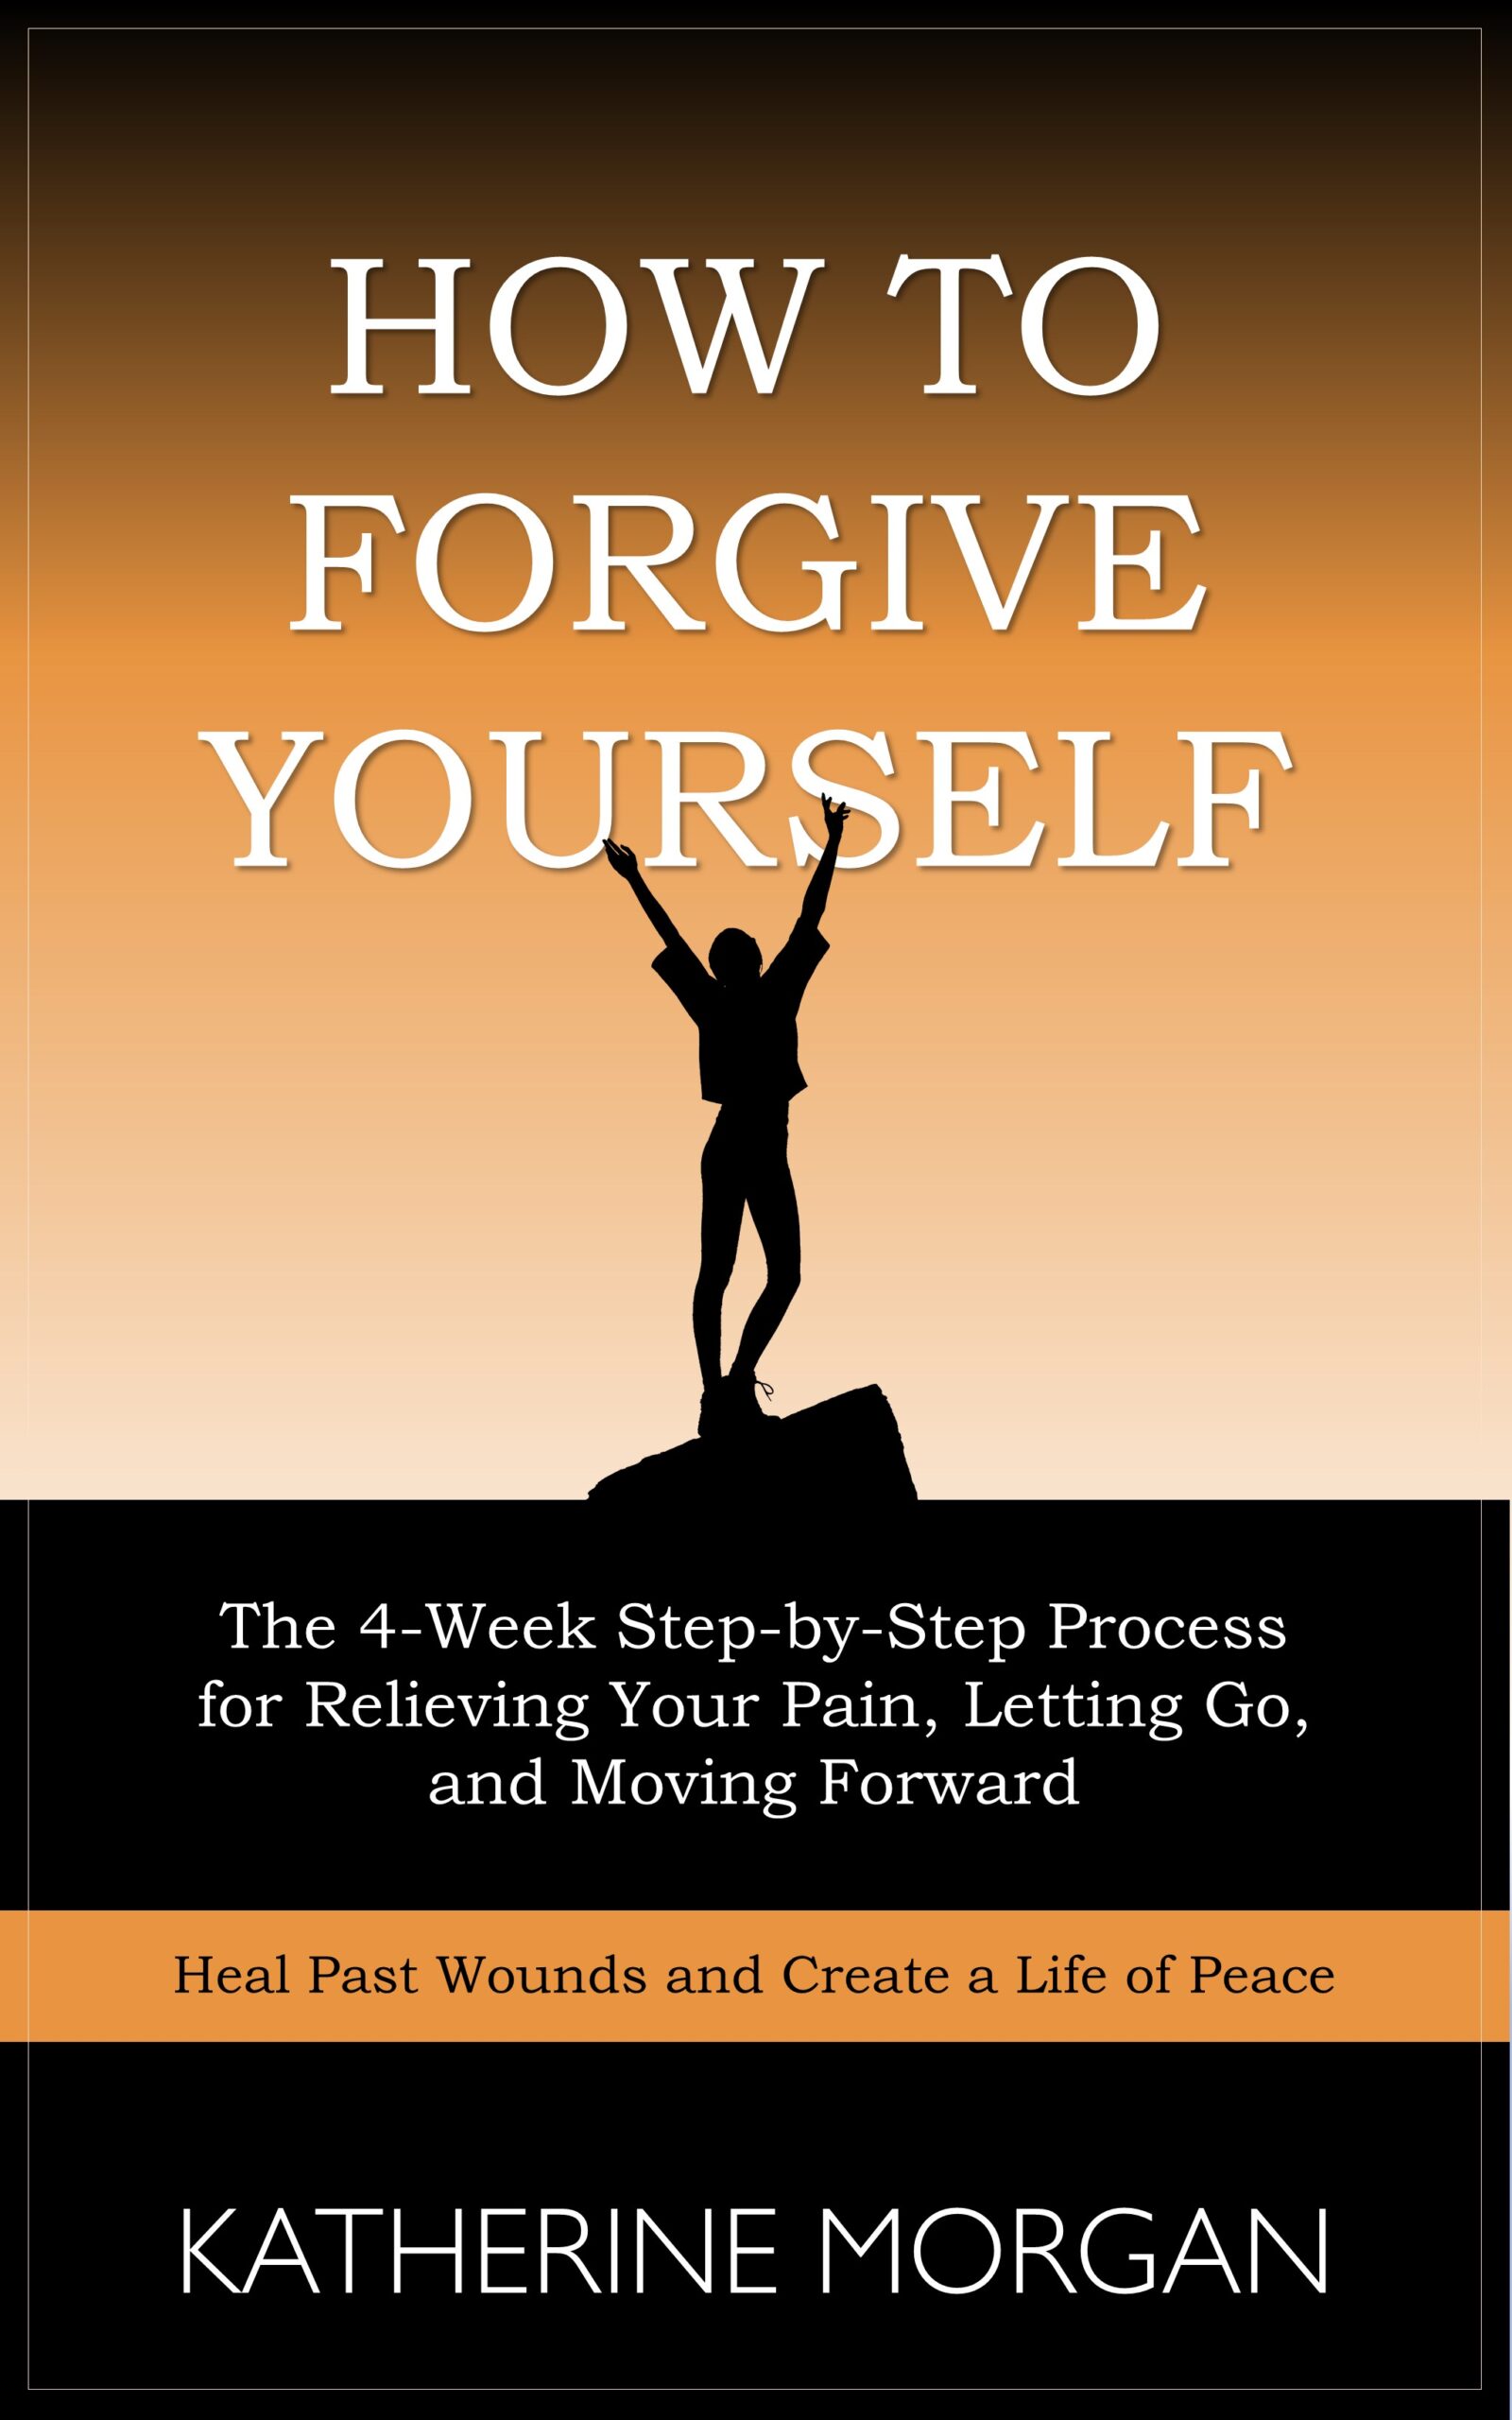 FREE: How to Forgive Yourself: The 4-Week Step-by-Step Process for Relieving Your Pain, Letting Go, and Moving Forward by Katherine Morgan